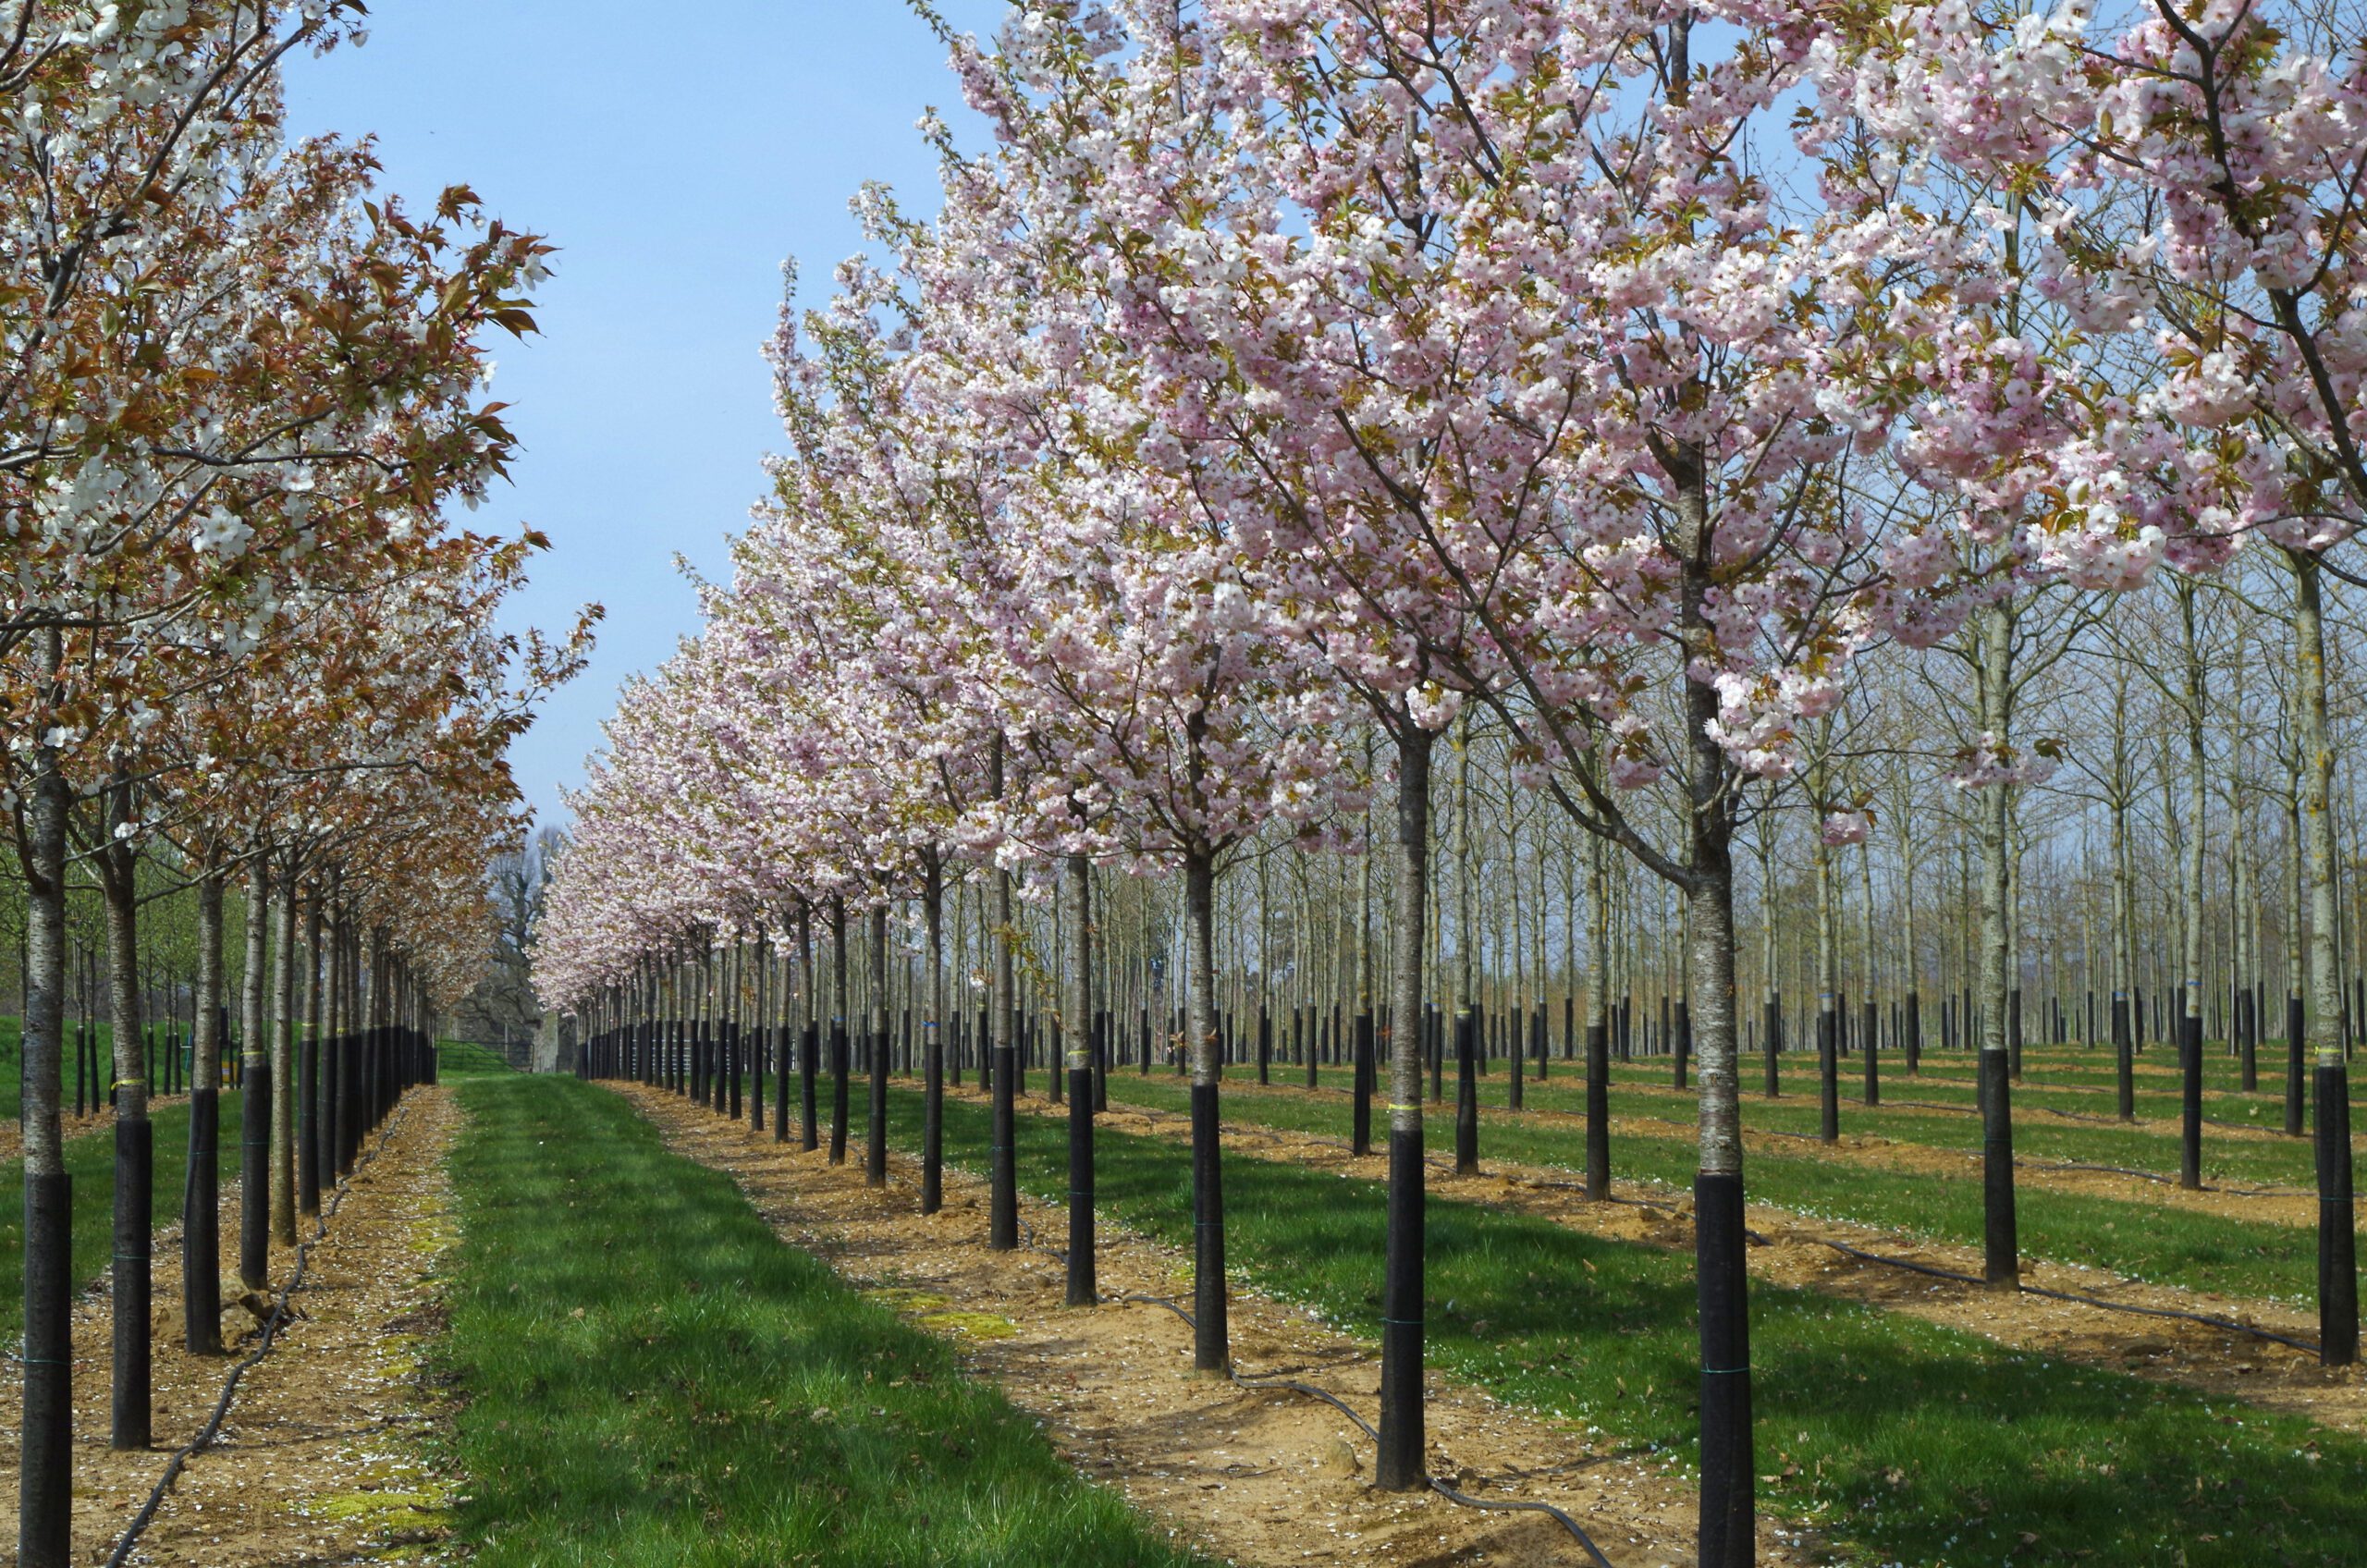 Prunus ichiyo semi mature trees with pink blossom growing in rows in a field